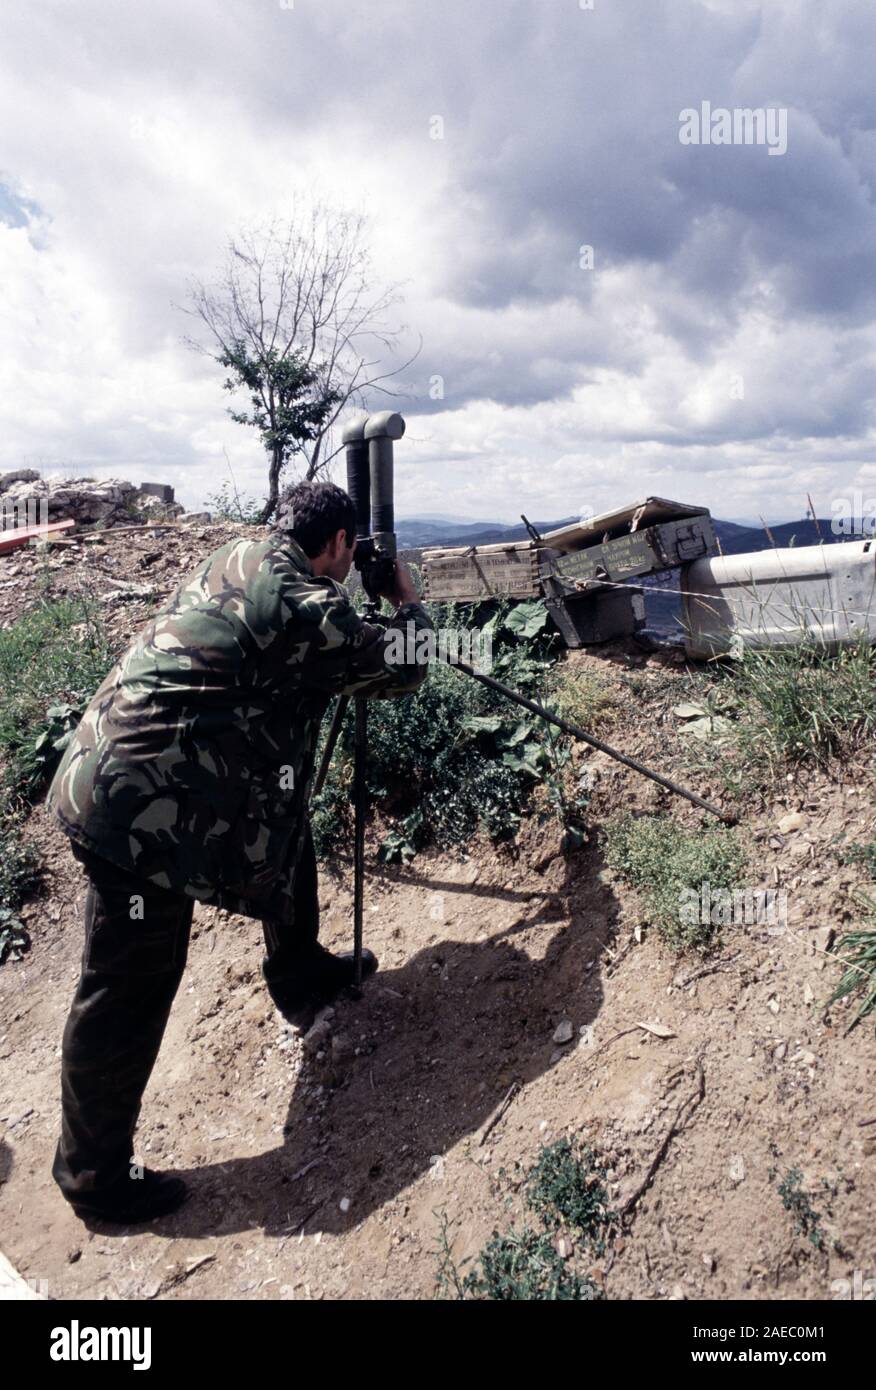 11th August 1993 During the Siege of Sarajevo: a Bosnian-Serb soldier uses WW2 trench binoculars to view the city below, next to his bunker on Mount Trebevic. Stock Photo